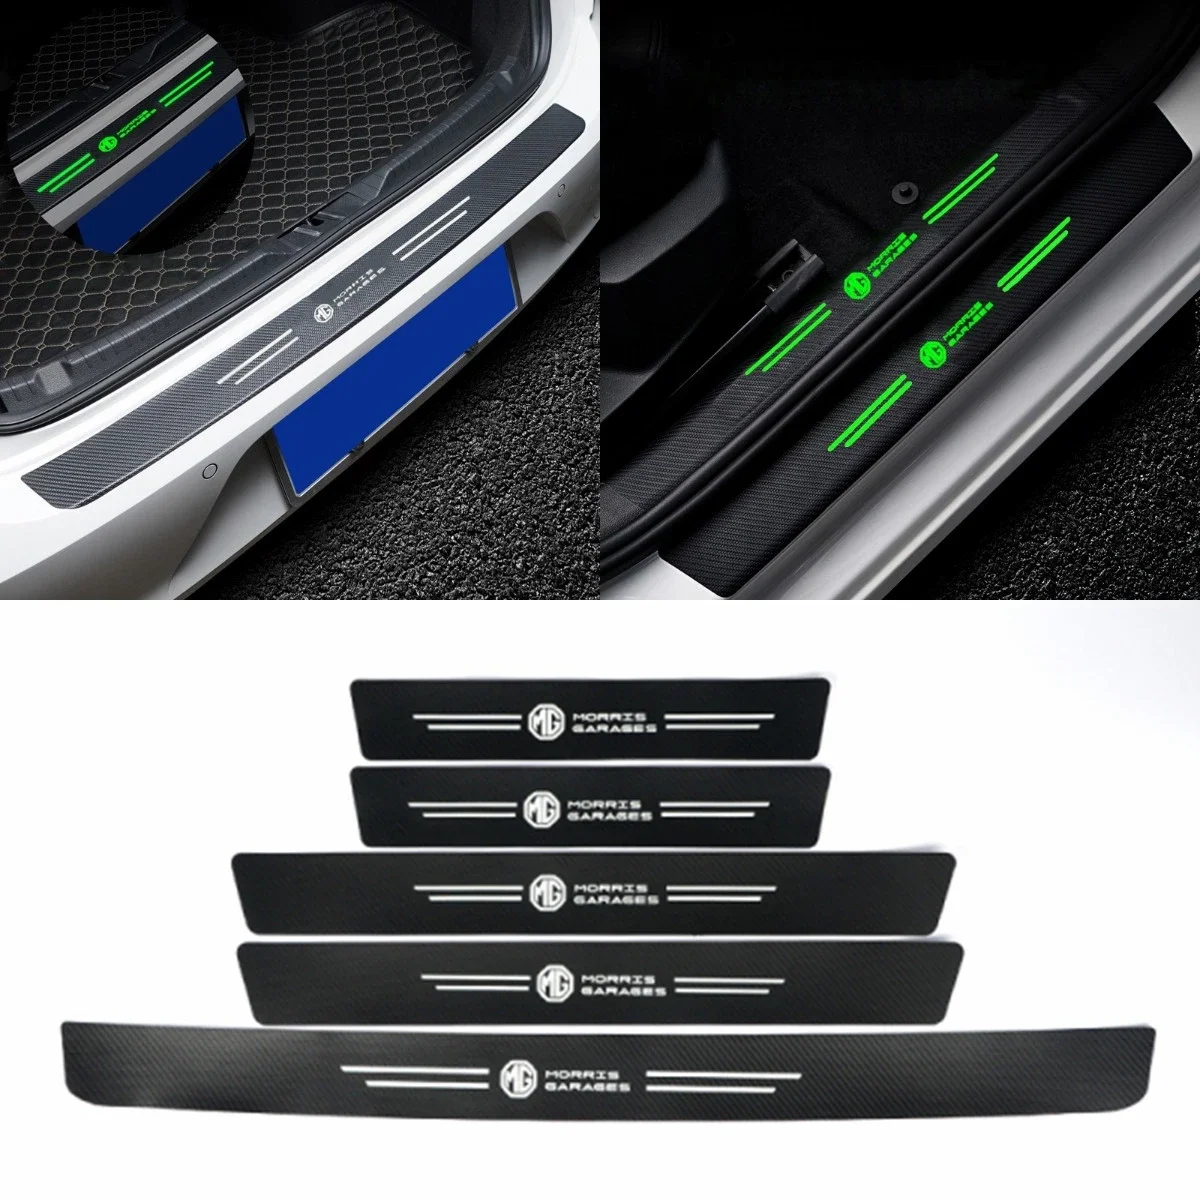 

Luminous Decals Car Door Threshold Protector Stickers for MG Logo Morris Garages 6 3 5 7 TF ZR ZS HS GS GT Hector RX5 RX8